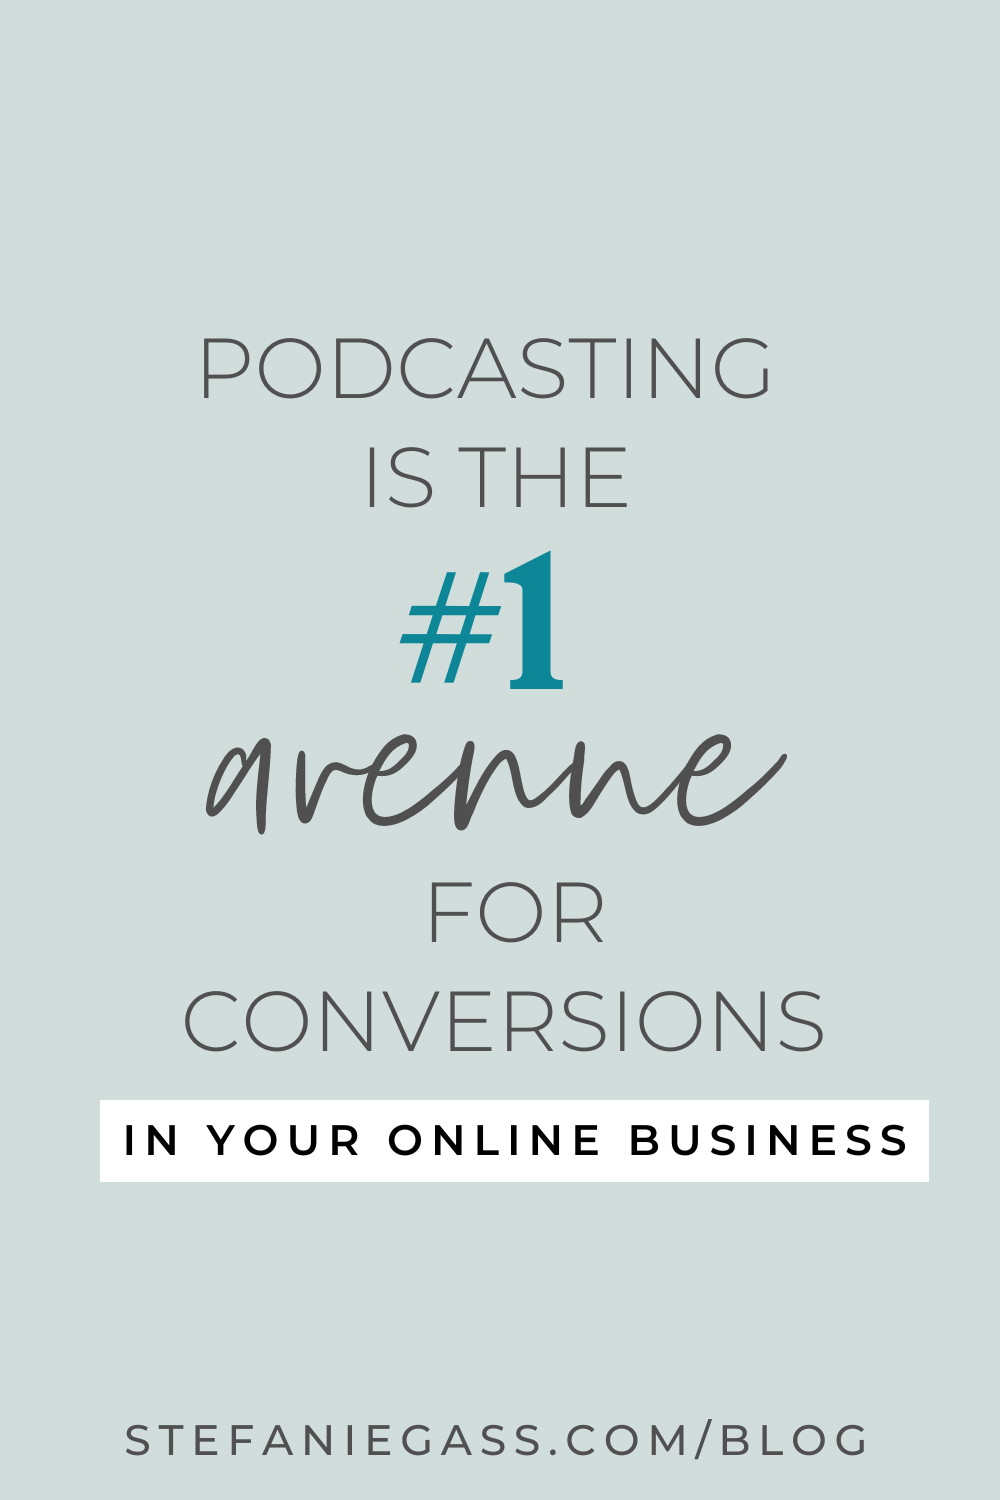 Image Text reads: Podcasting is the #1 avenue for conversions in your online business.  Stefaniegass.com/blog